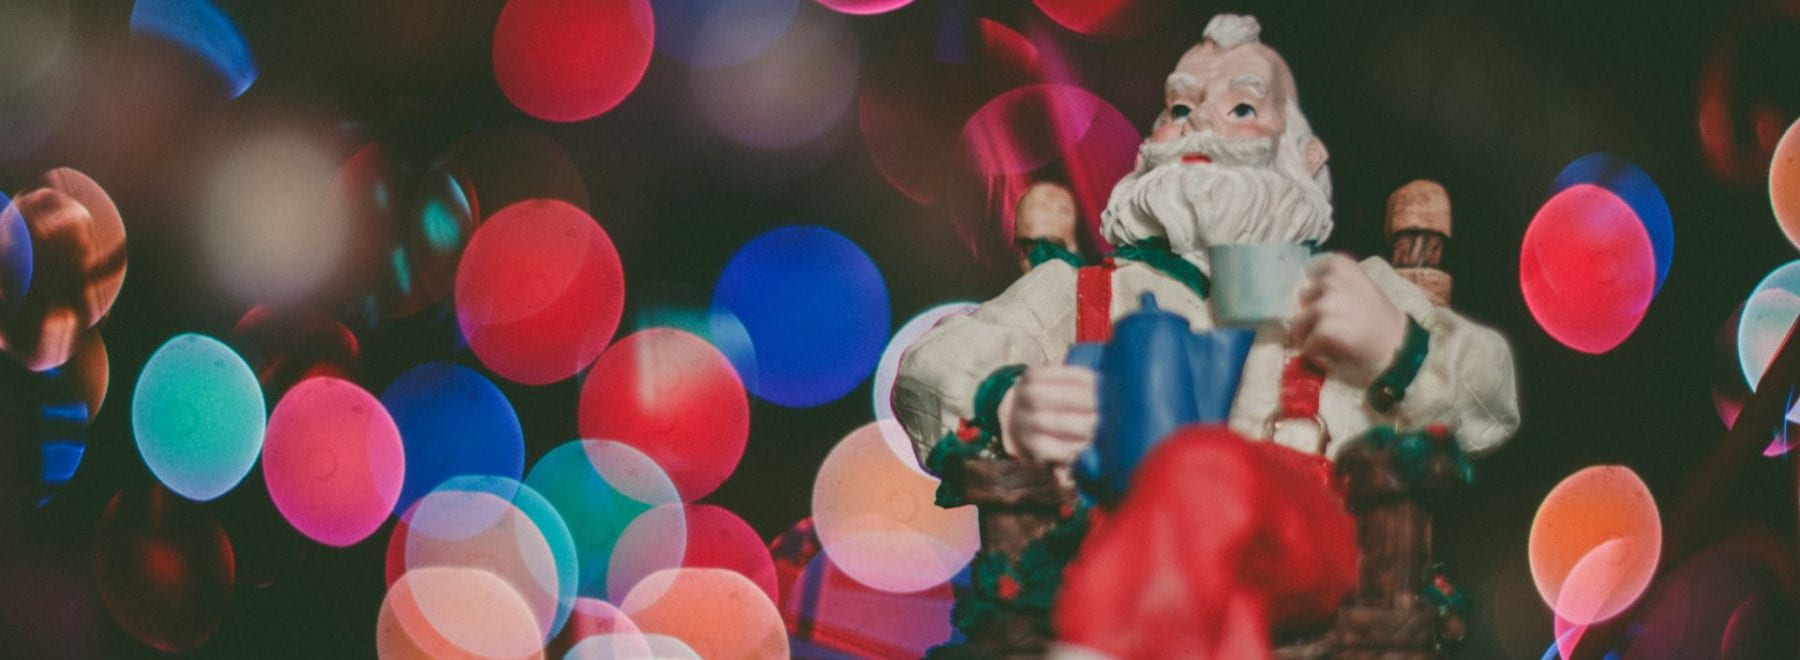 Close up of a santa figure with blurred lights surrounding